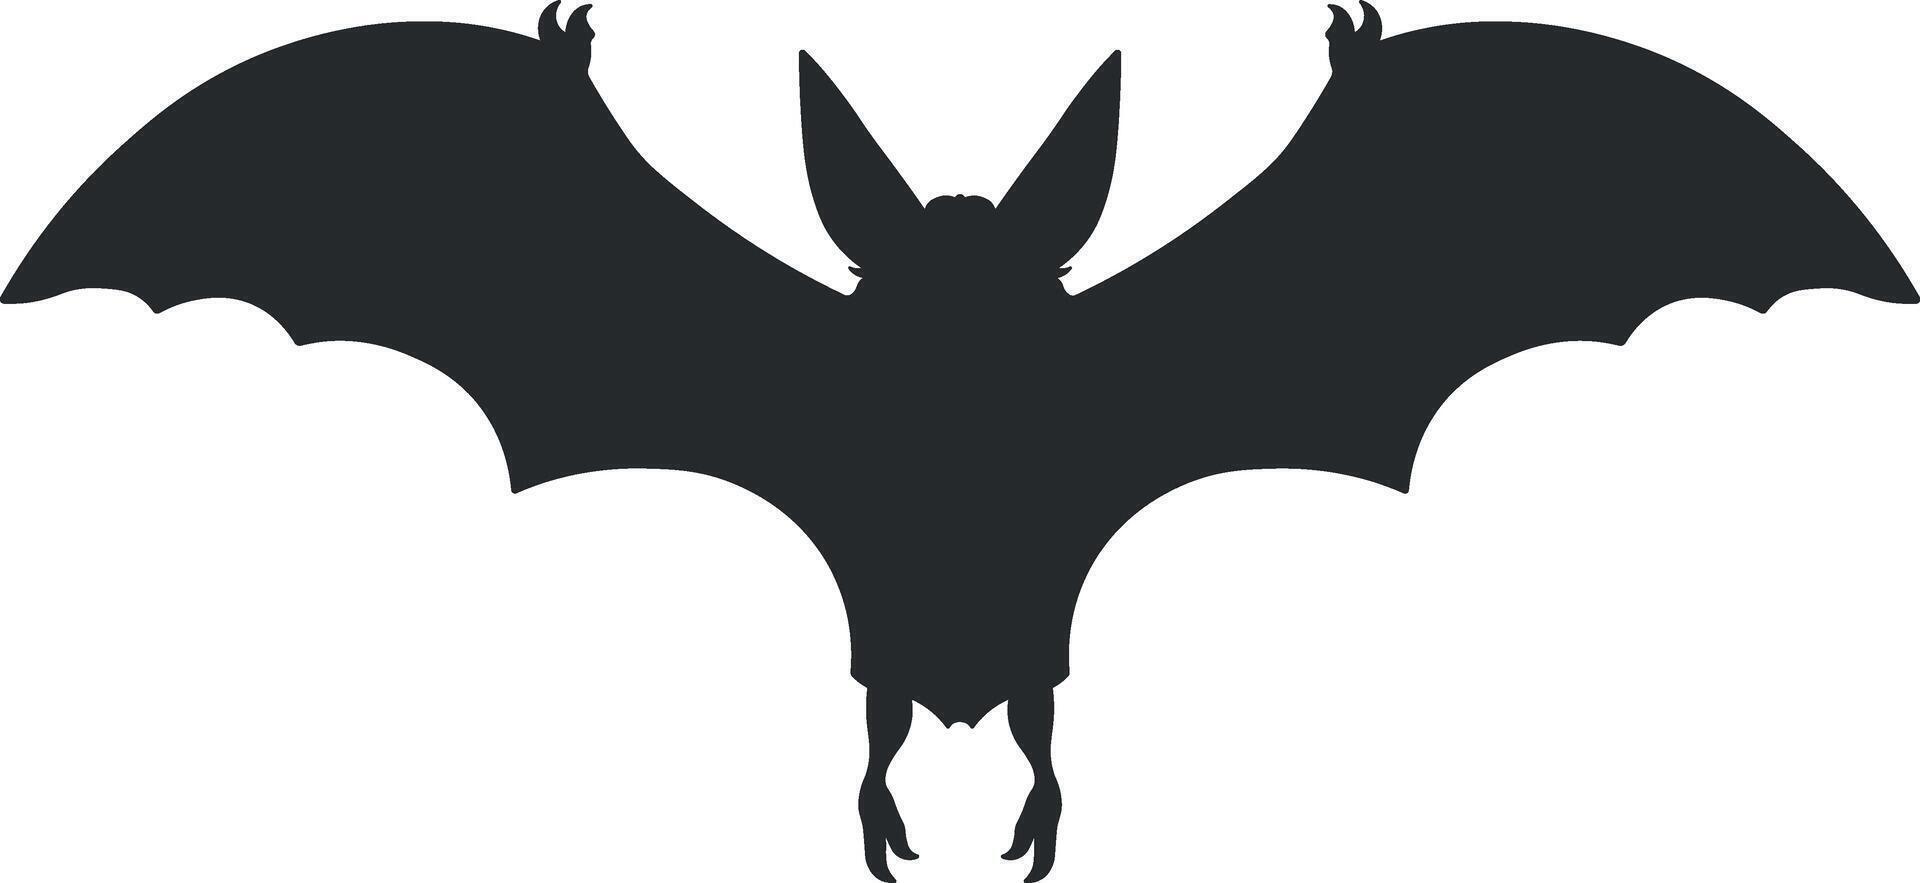 black silhouette of a bat without background vector